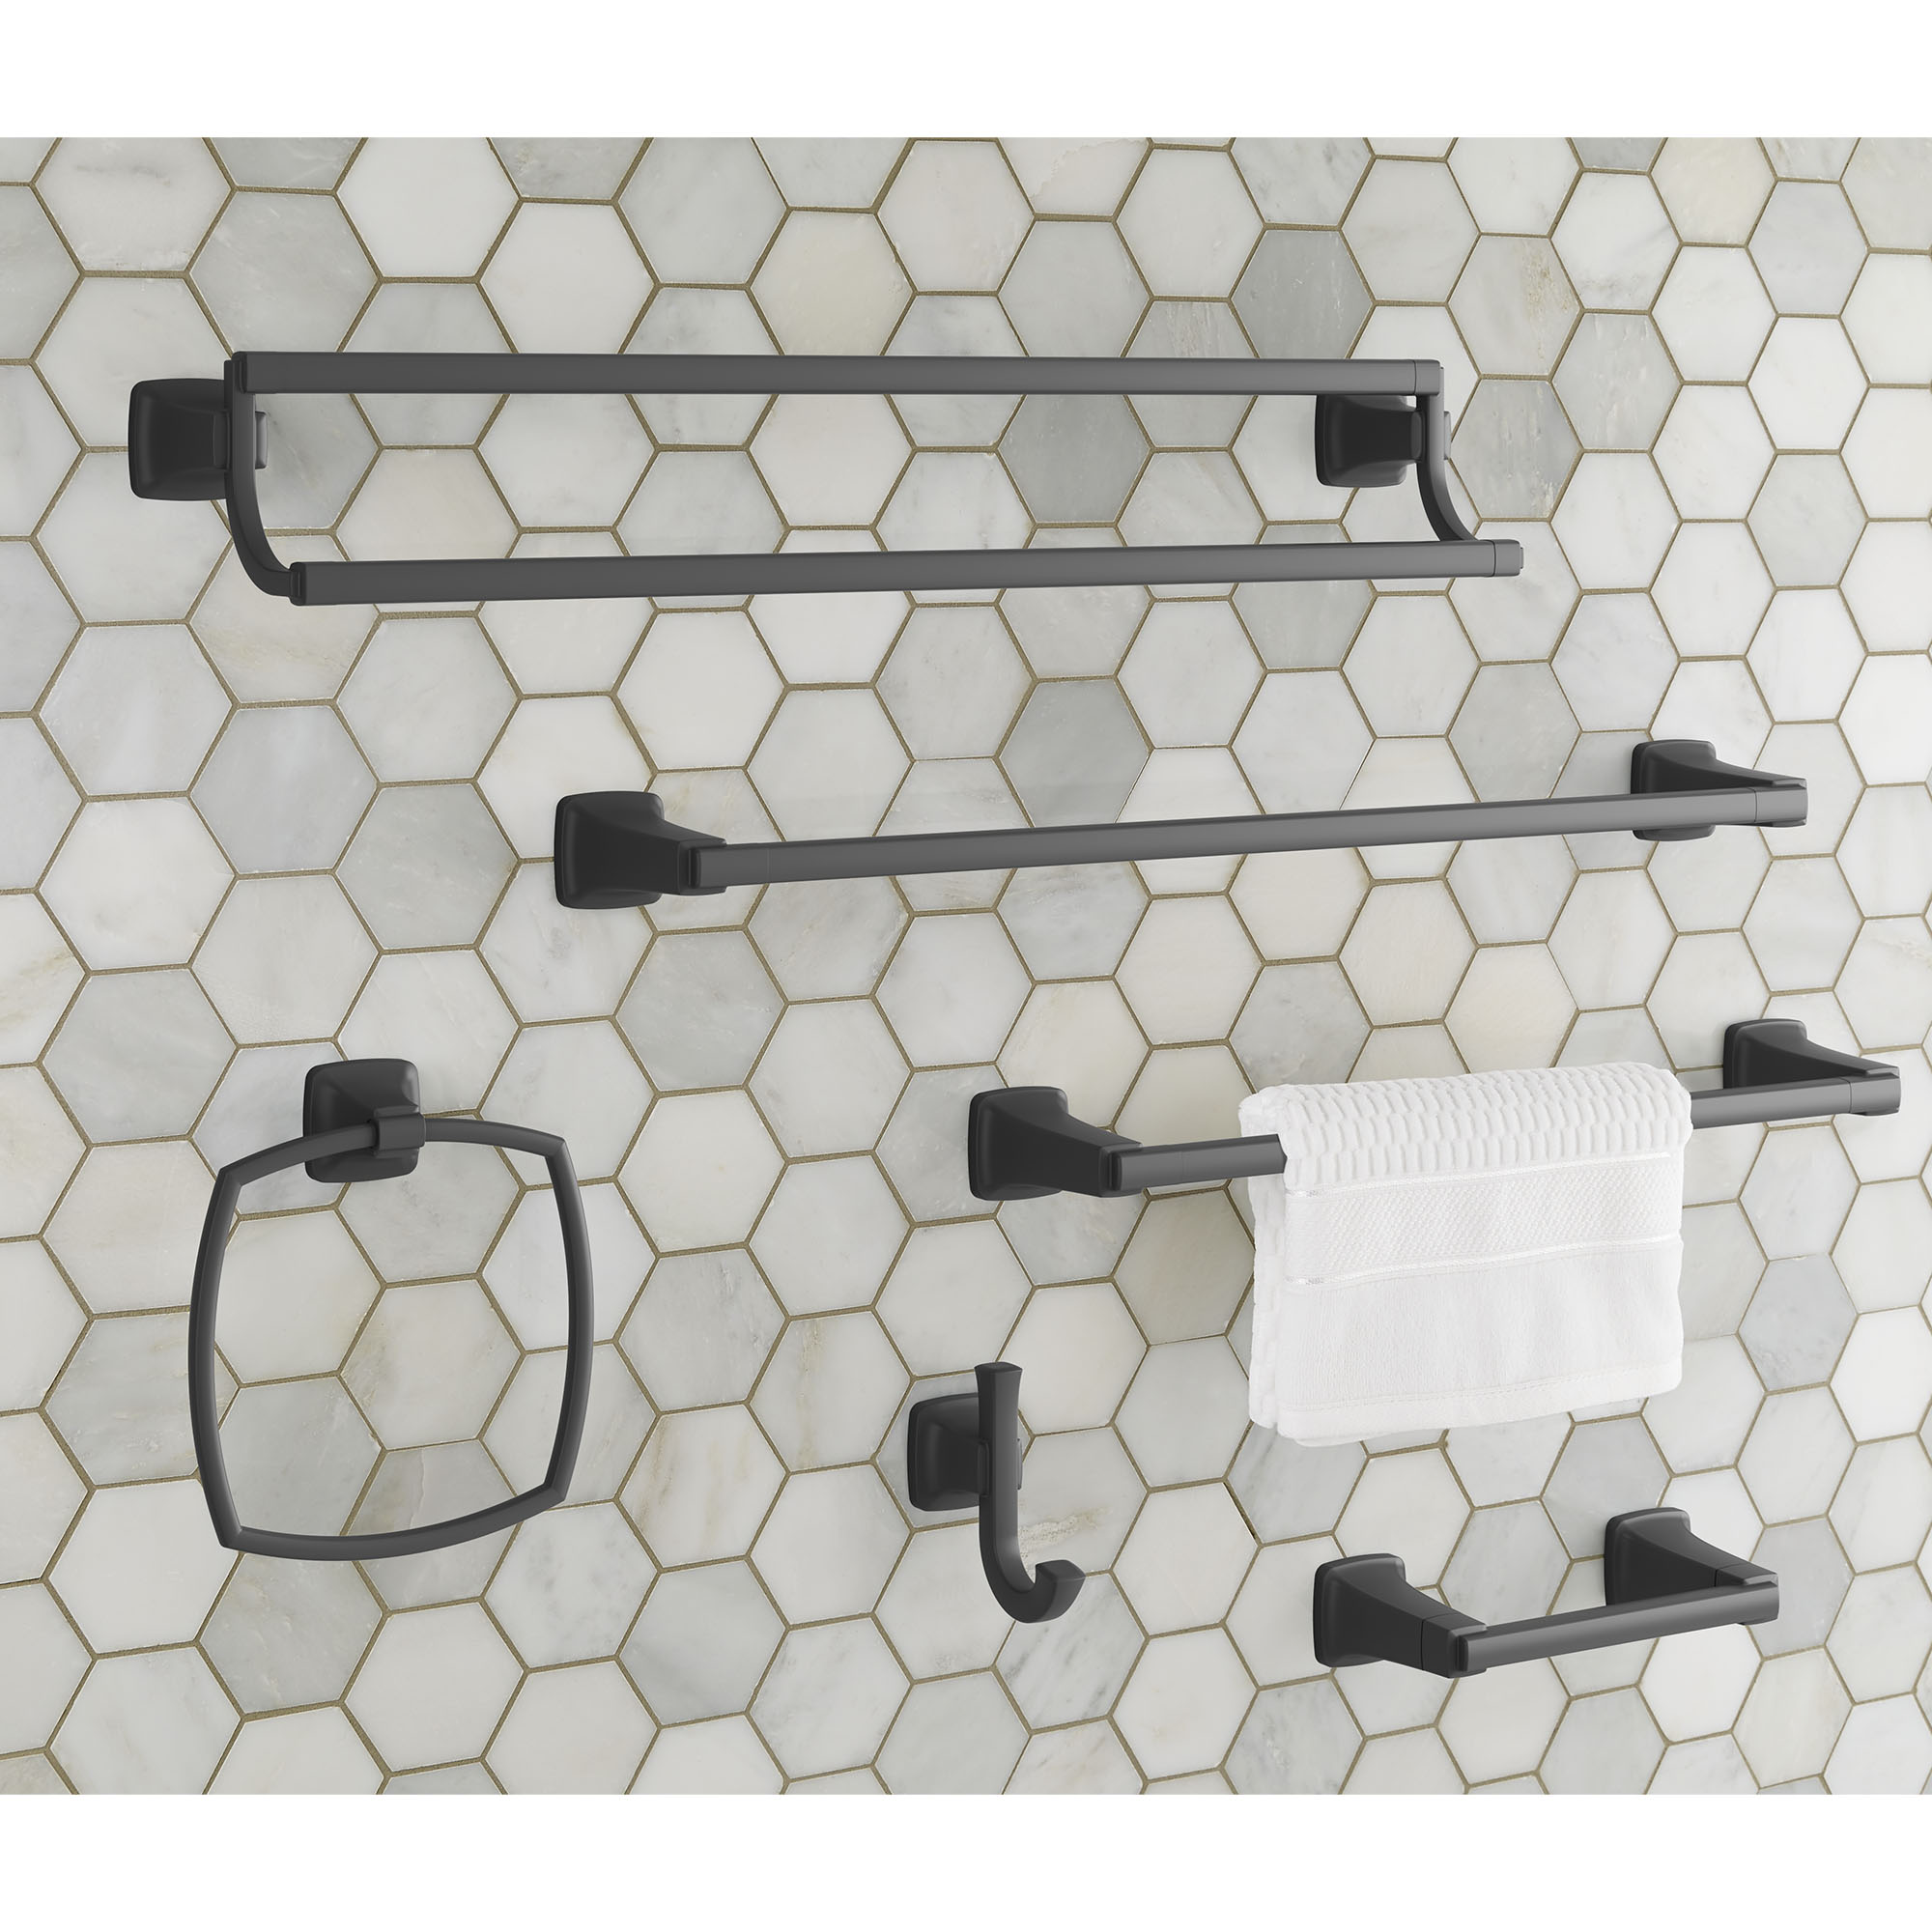 Townsend® Towel Ring